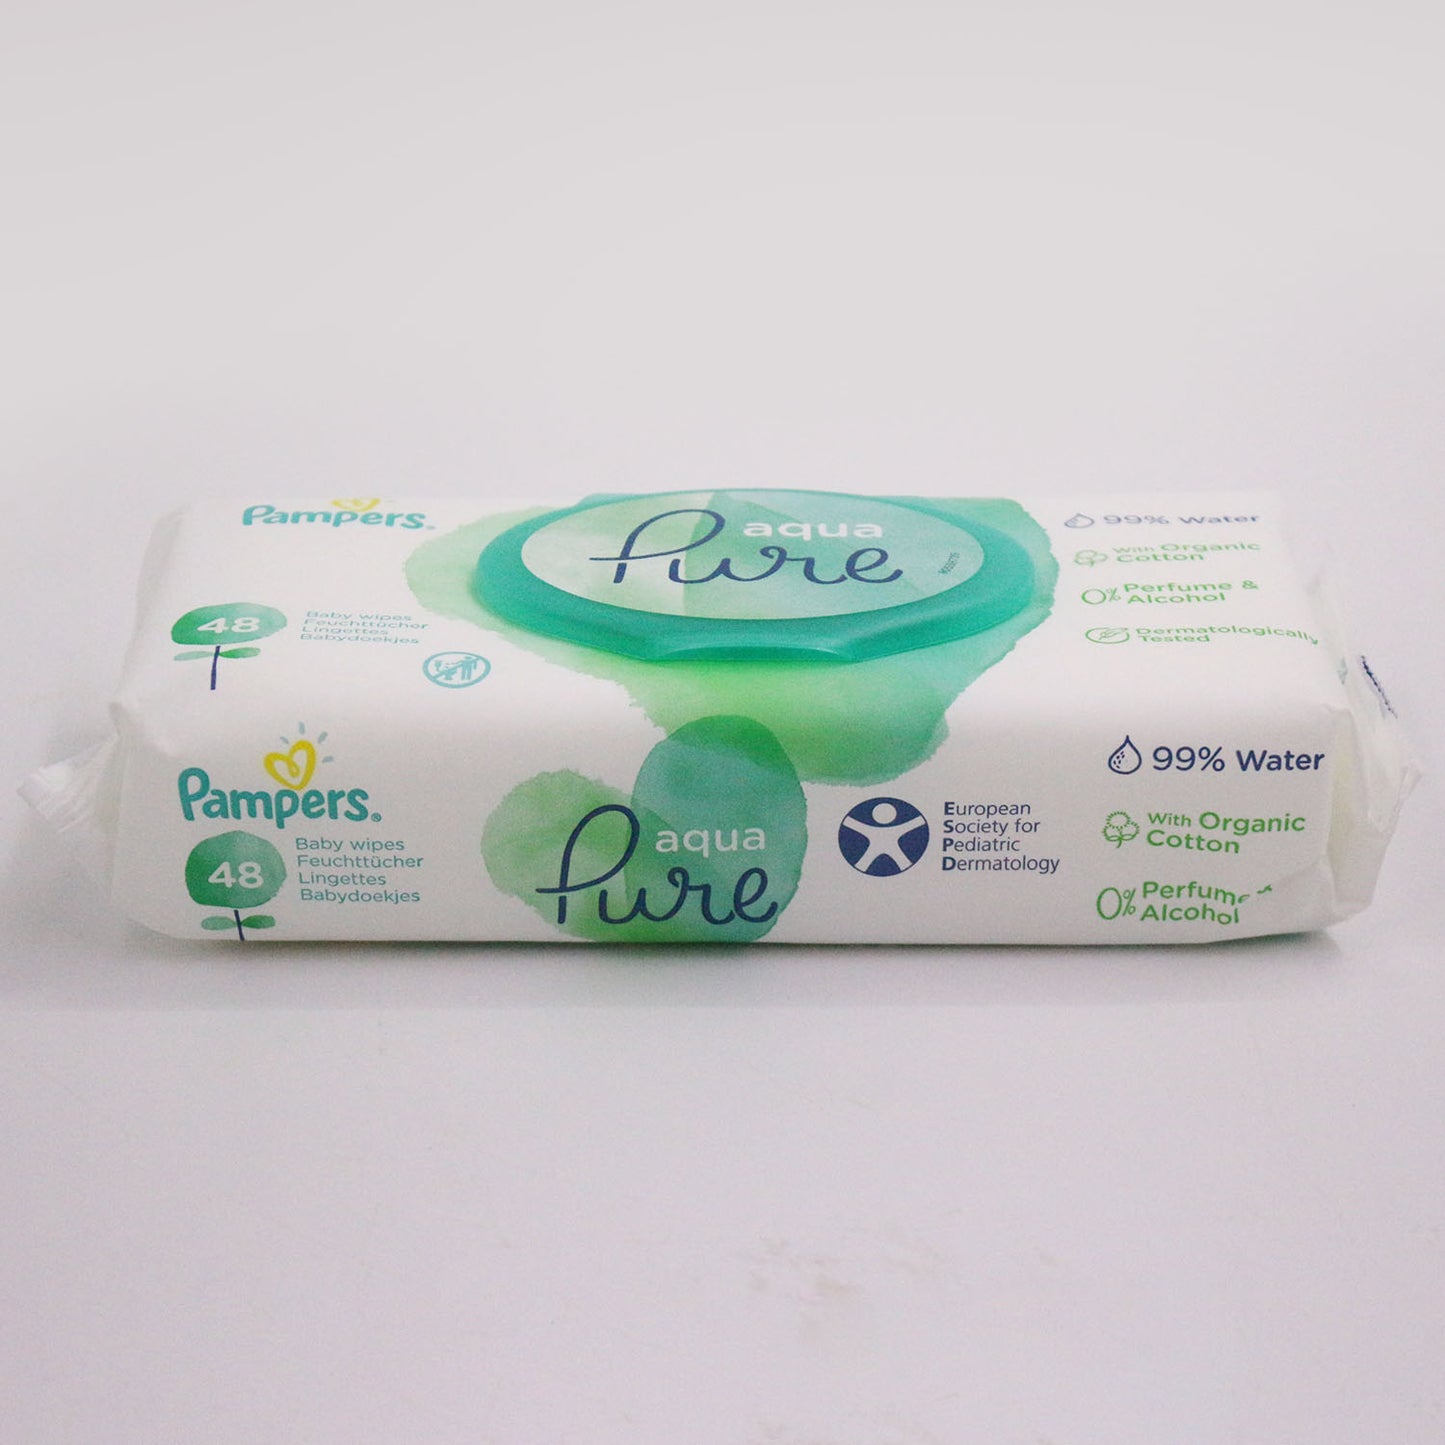 Pampers Aqua Pure Sensitive Waterwipes 48 baby wipes x 6